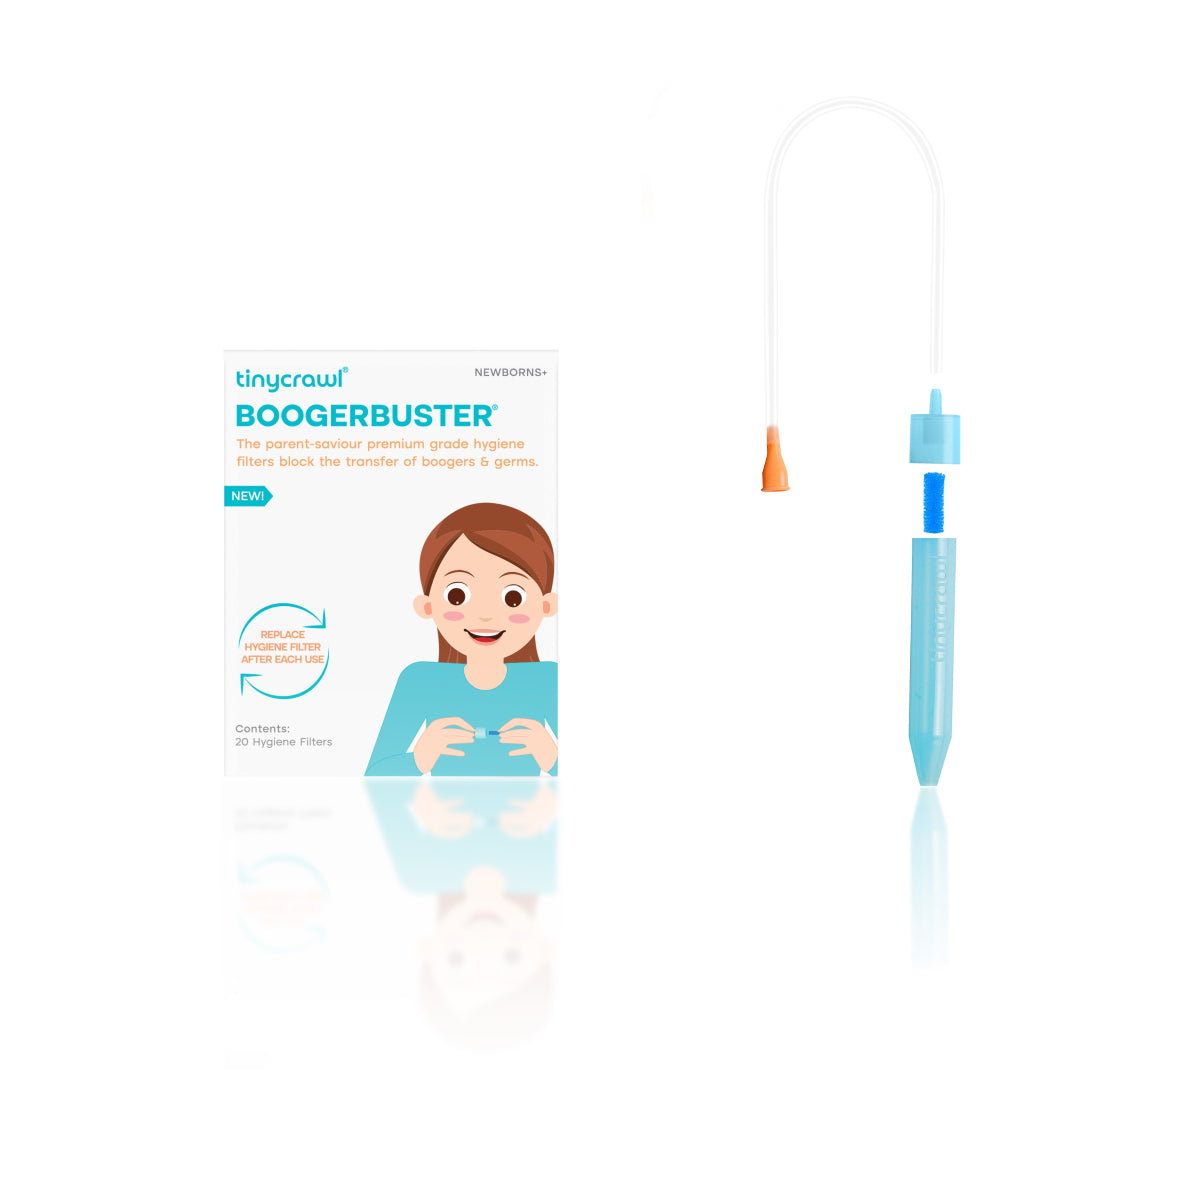 HYGIENE FILTERS for Boogerbuster